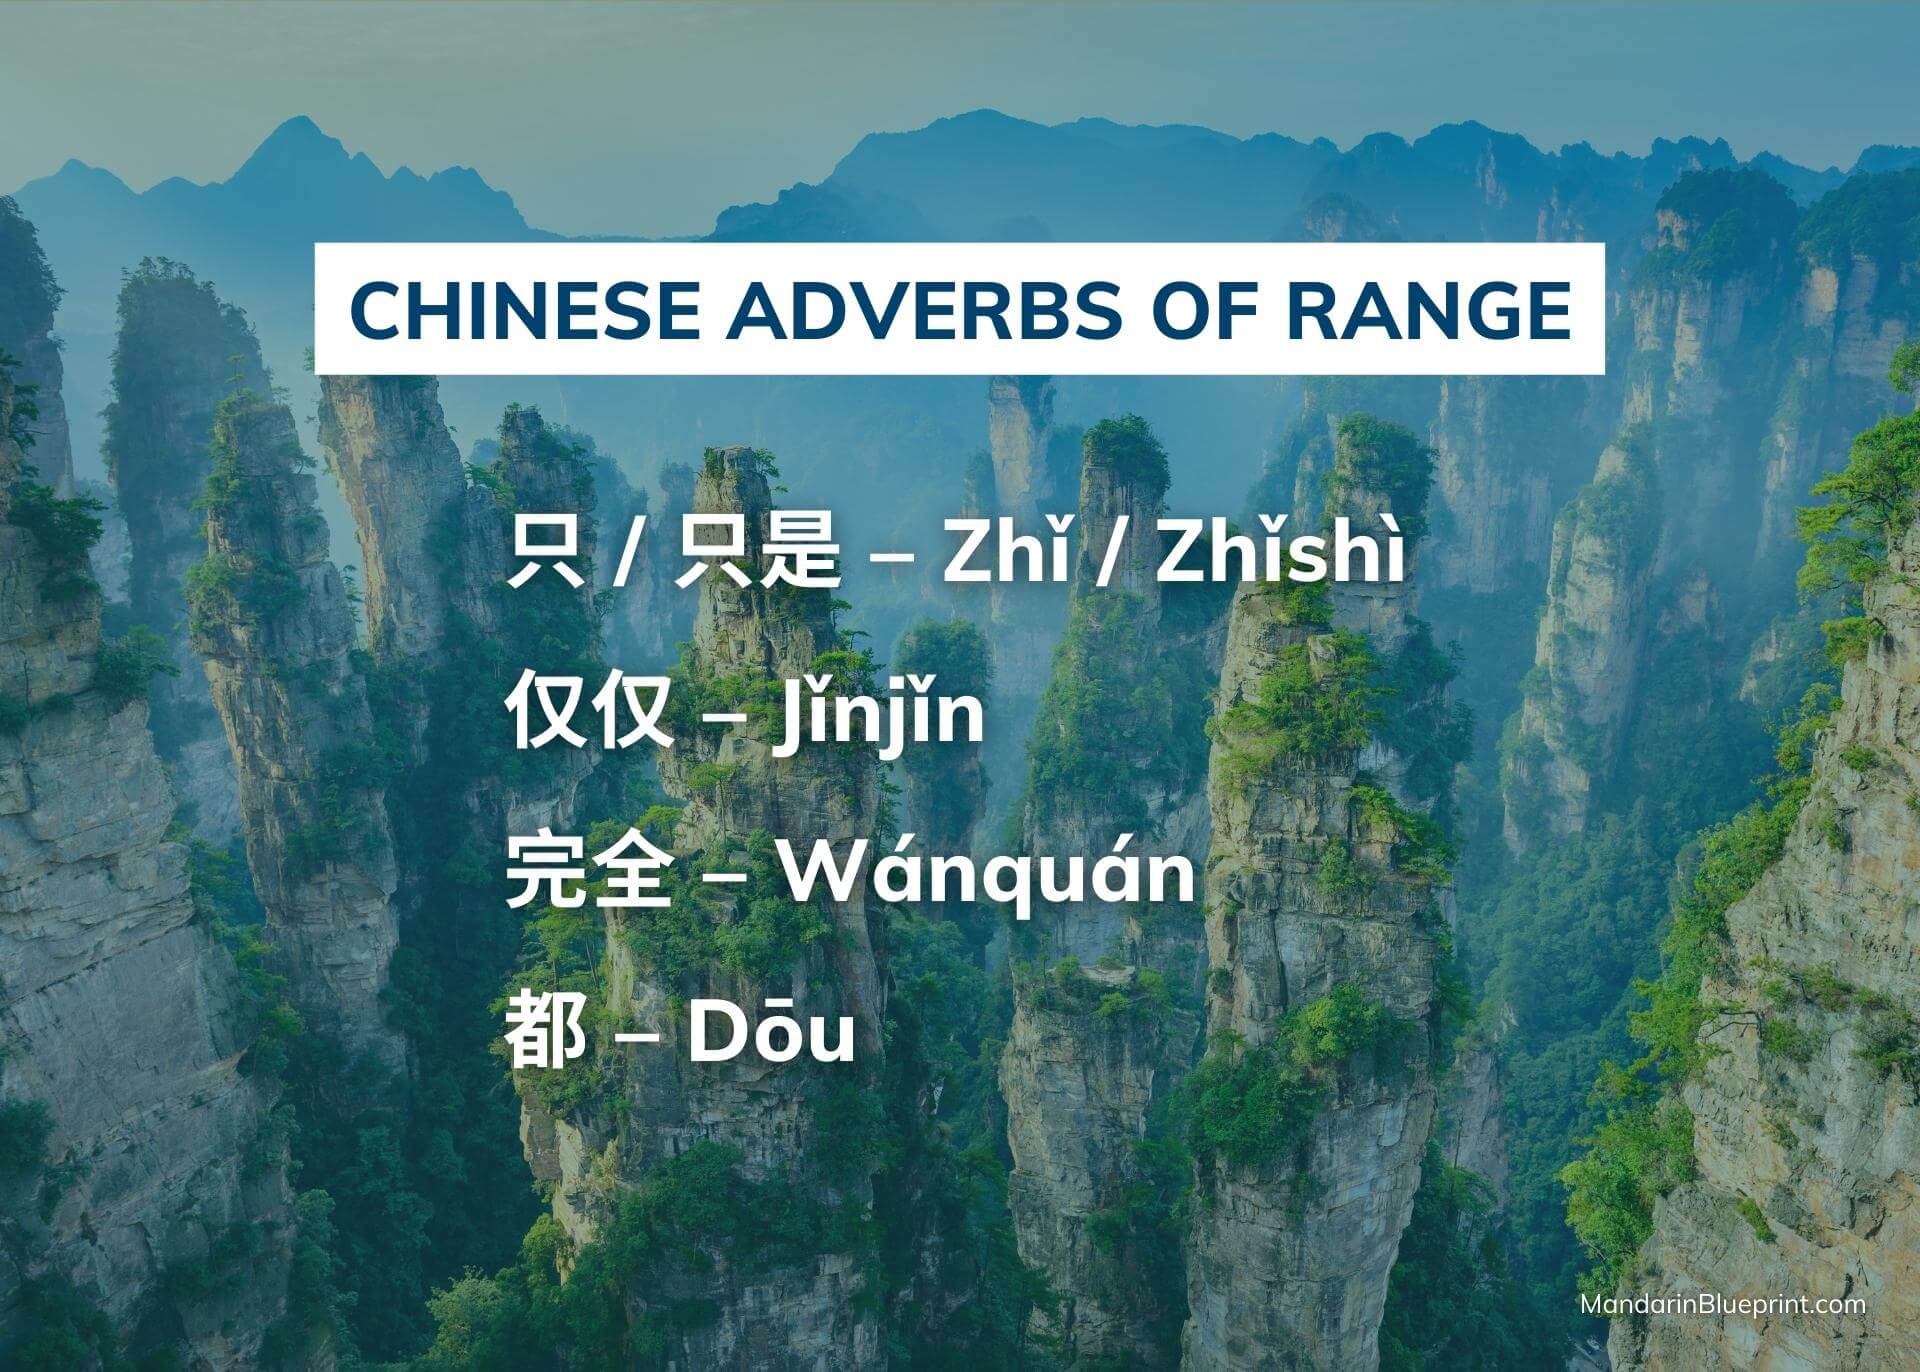 Chinese adverbs of range